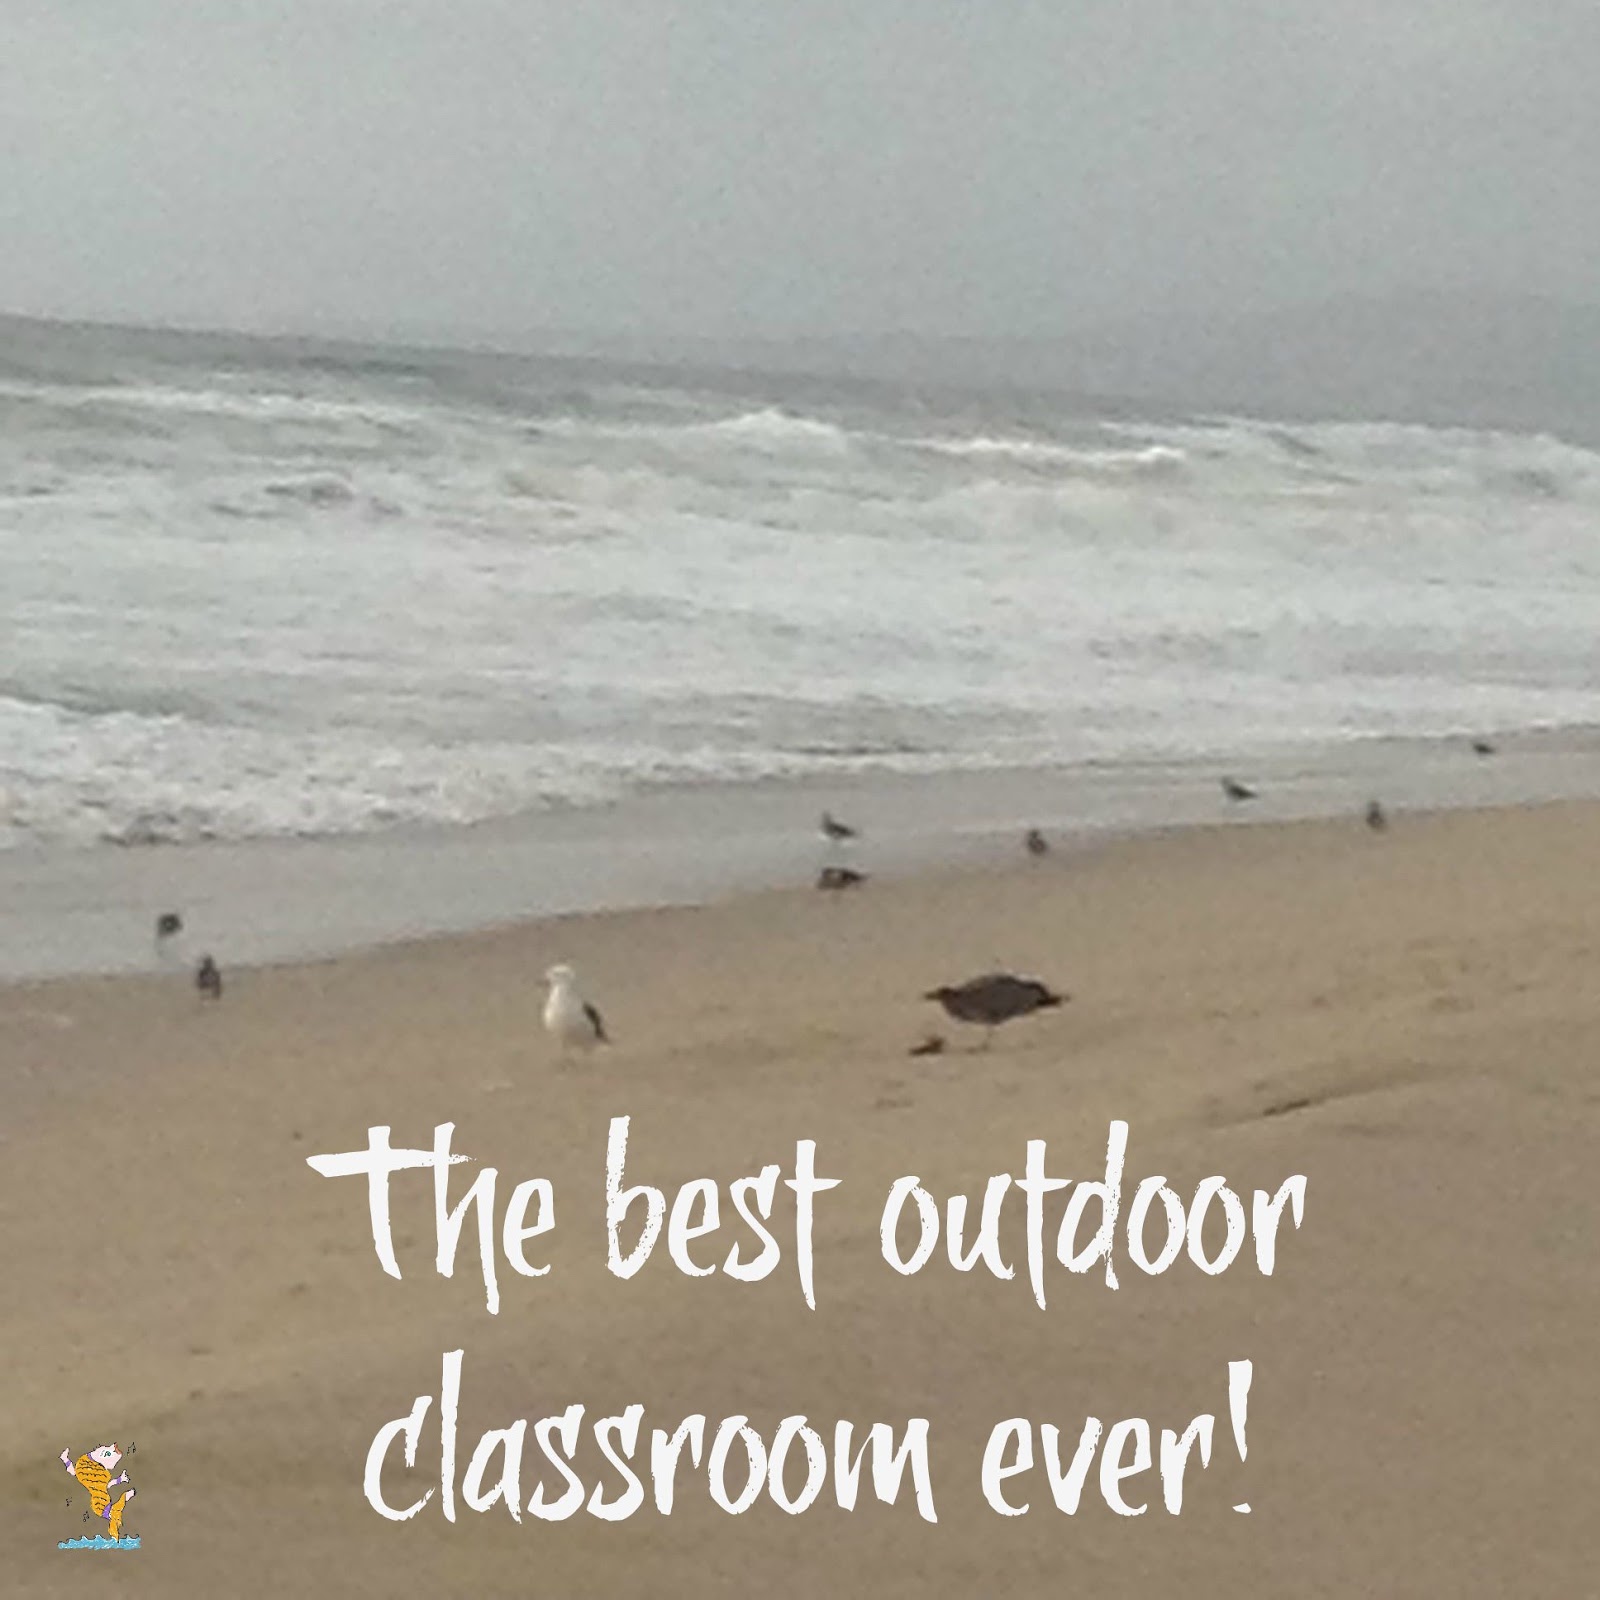 The Outdoor Classroom At Its Best! Look What We Are Learning At The Beach!  | Magical Movement Company: Carolyn's blog